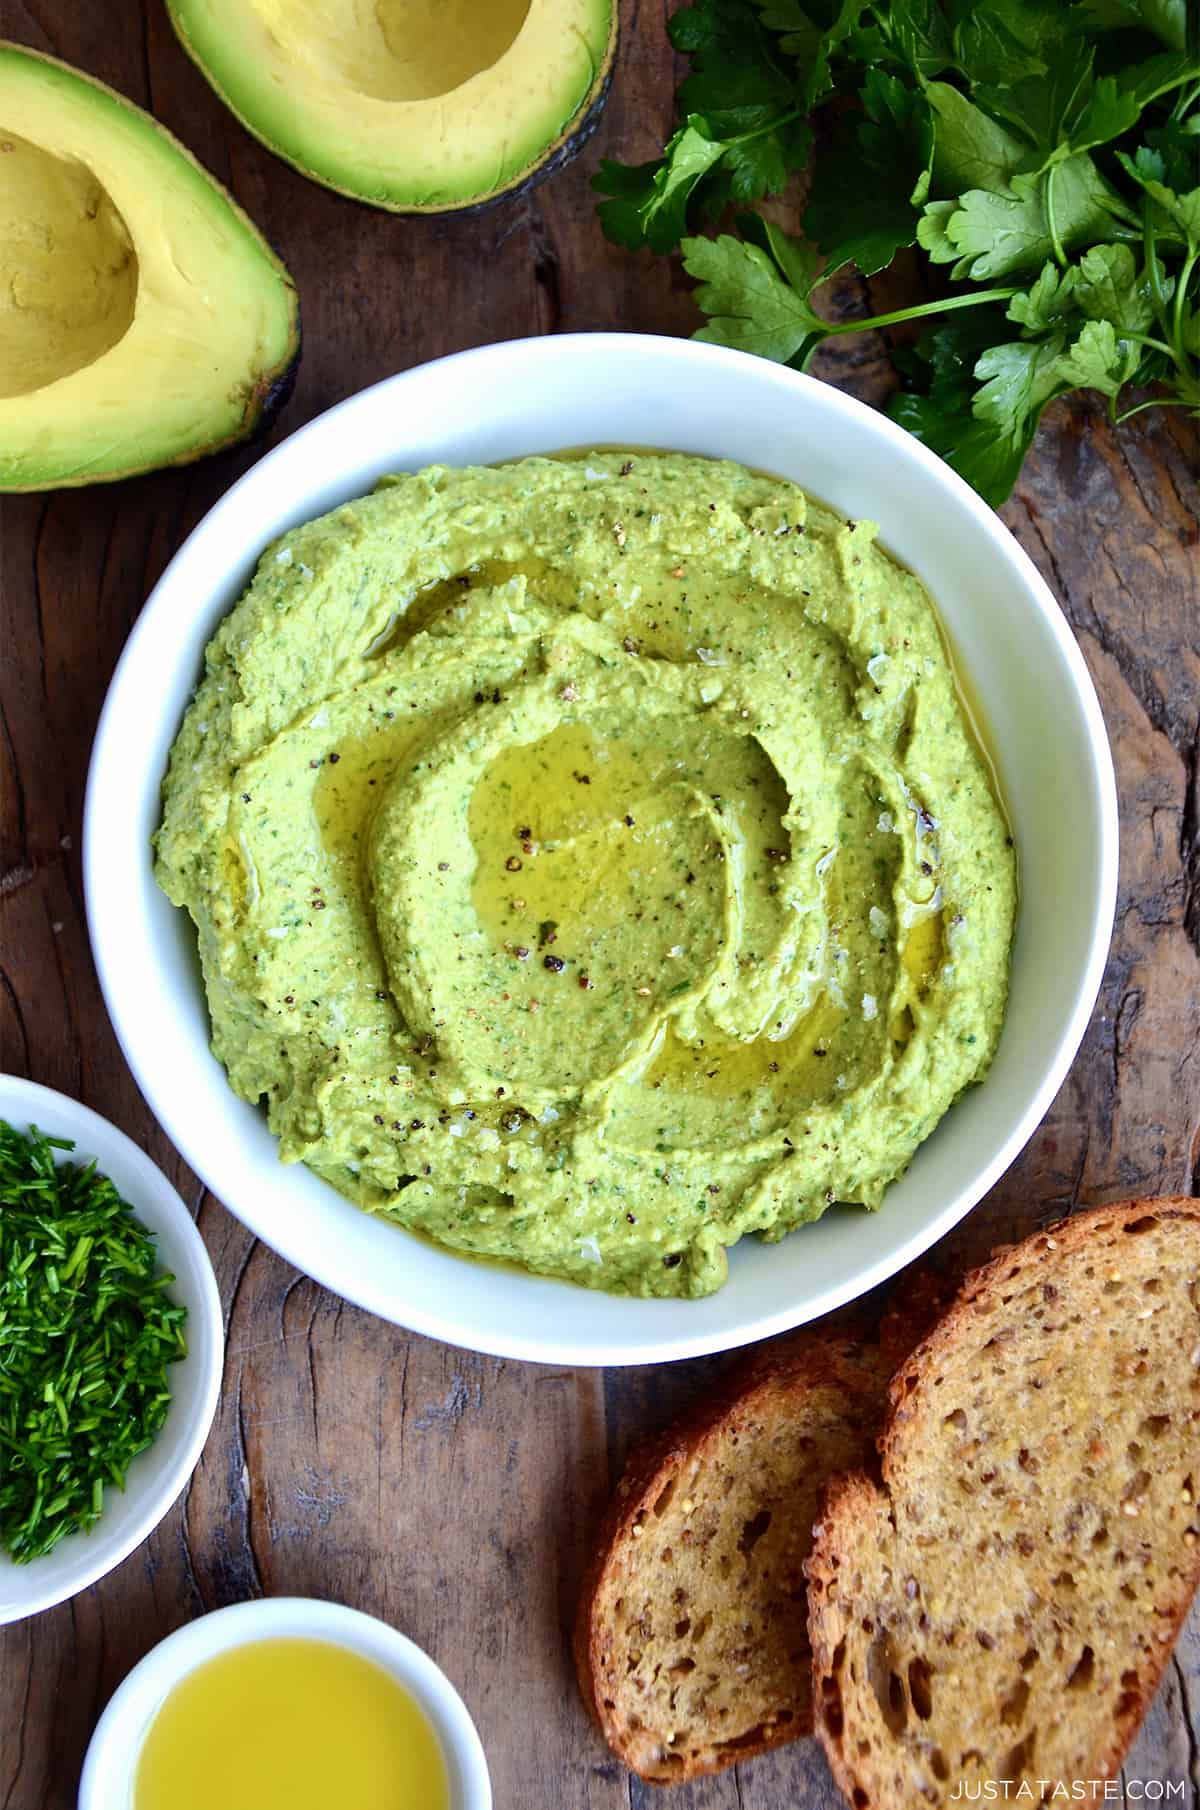 Avocado hummus in a bowl topped with olive oil, flakey salt and pepper. Small bowls of olive oil and minced chives, toasted bread, fresh parsley and a halved avocado surround the hummus.